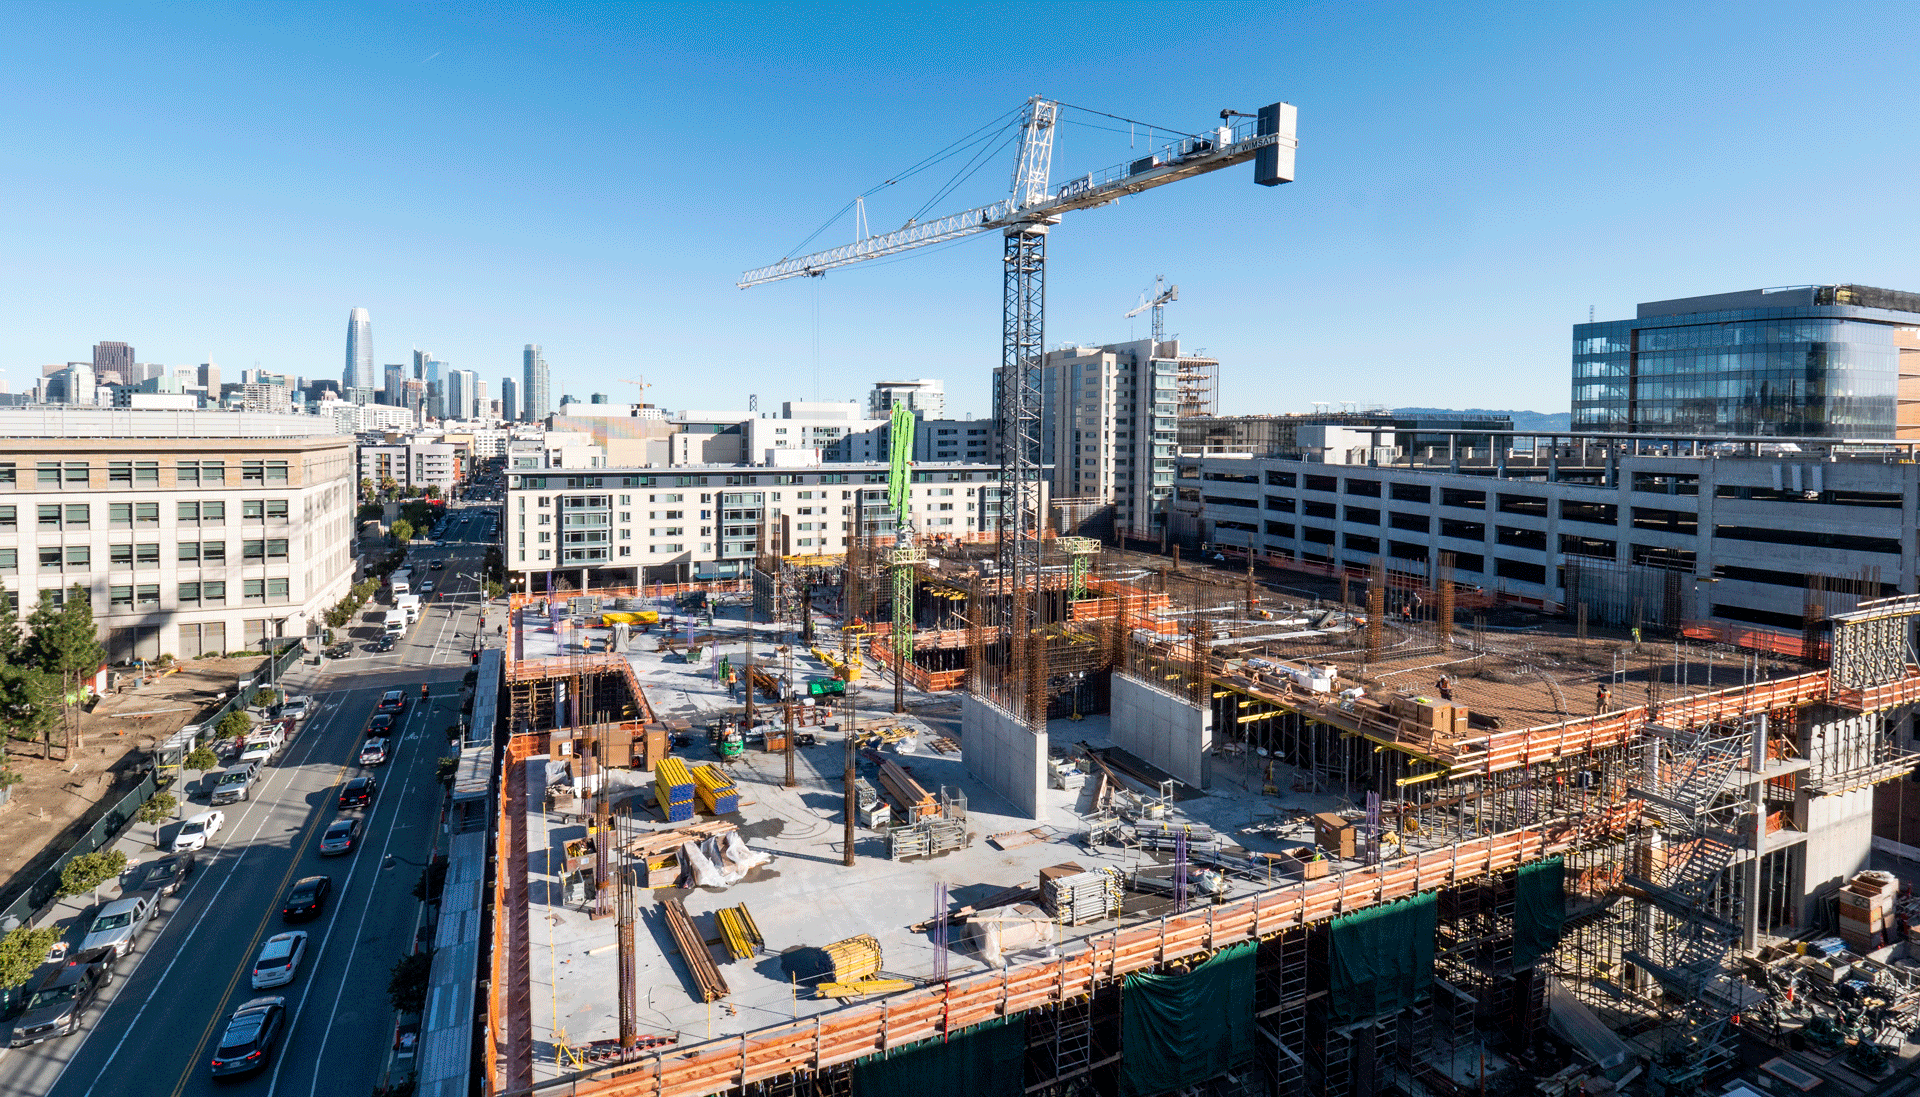 A crane stands in the middle of an active construction site.